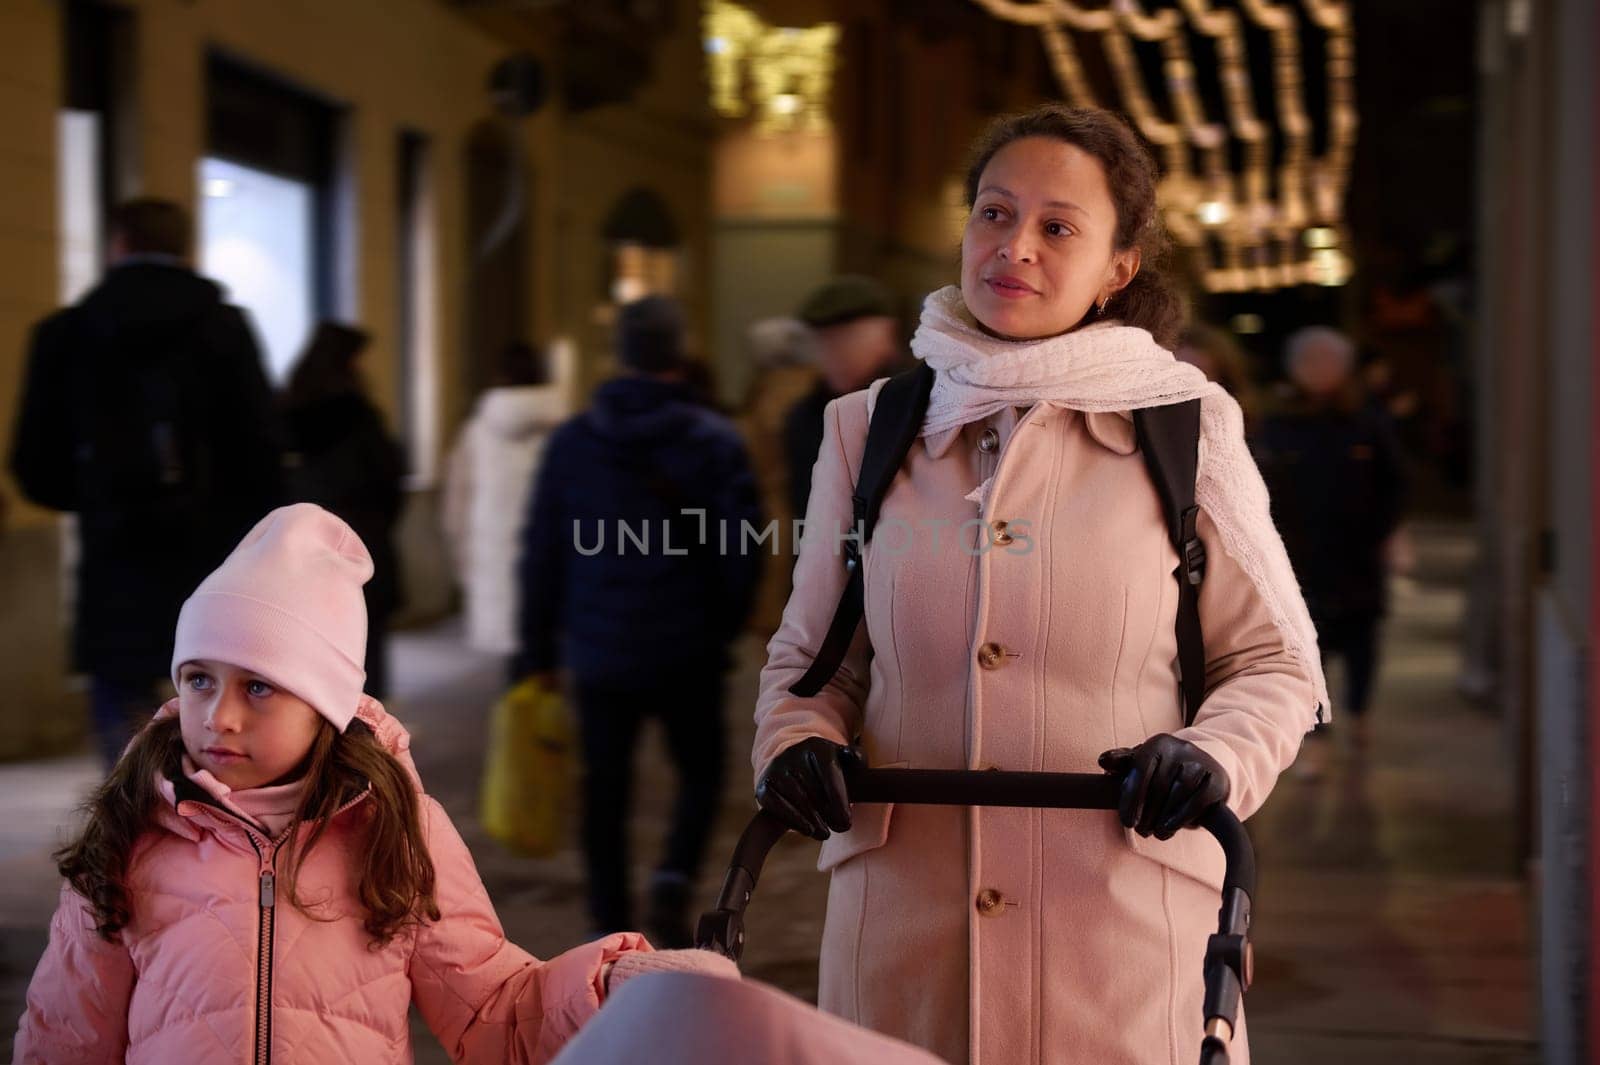 Mother with baby pram and her adorable little daughter strolling the street, enjoying festive atmosphere and Christmas funfair, visiting the traditional family market in December in the night time